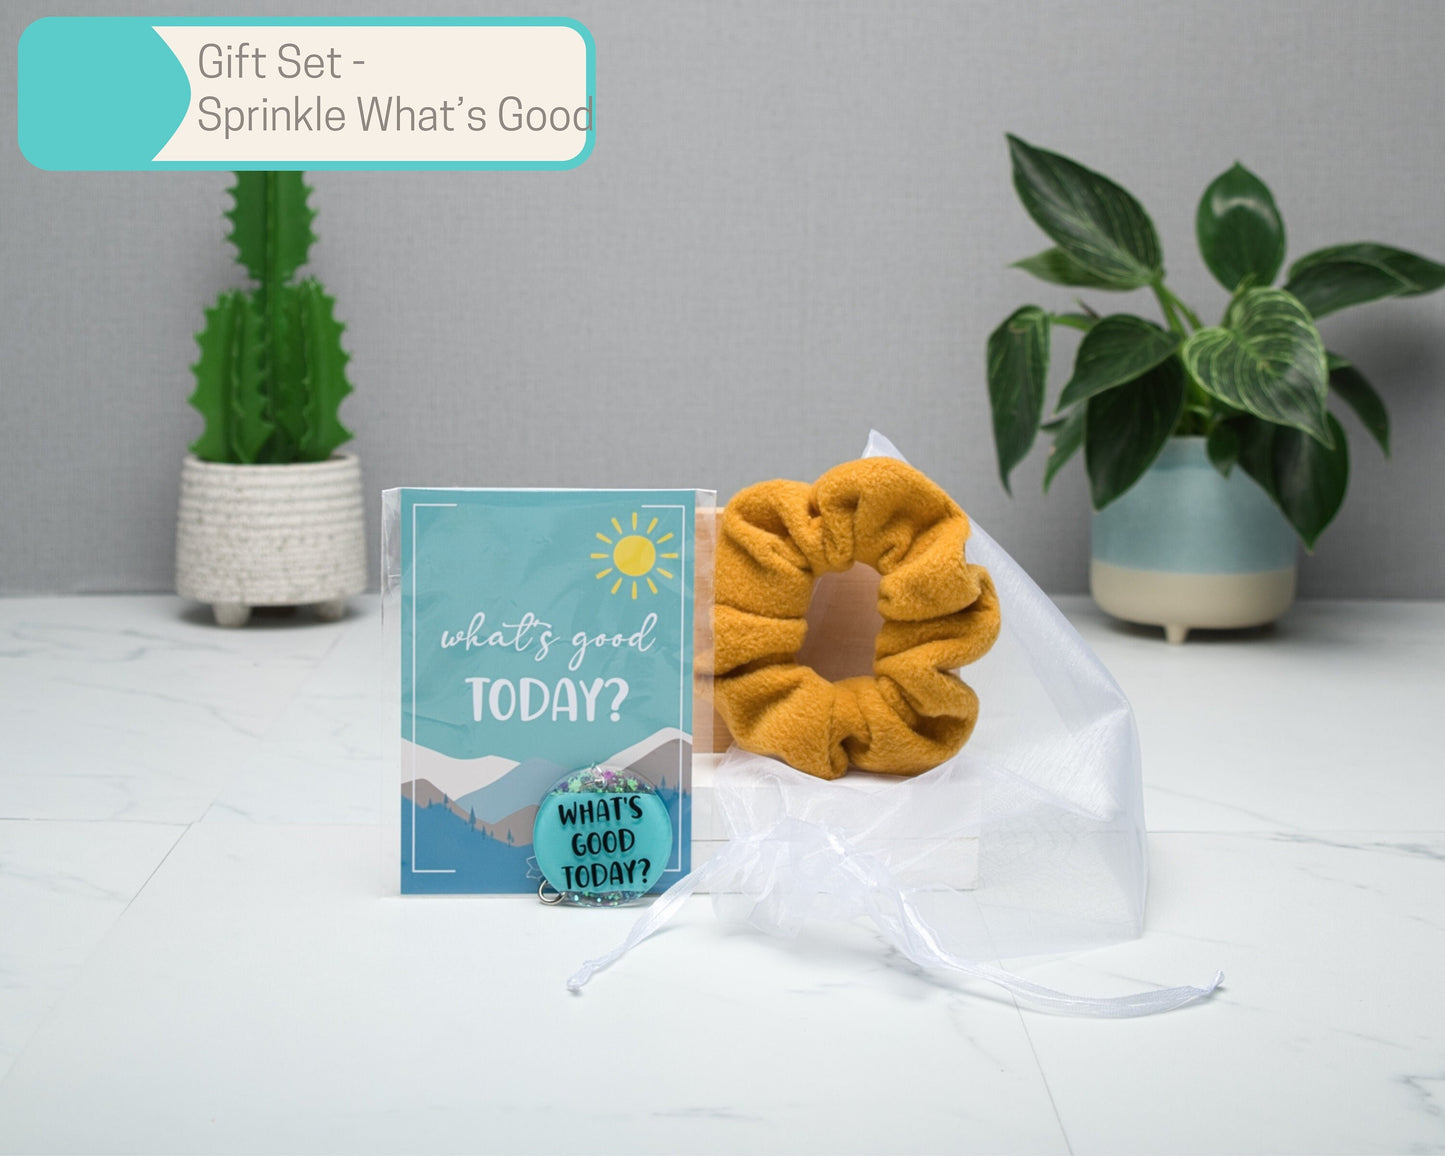 Motivational Wall Art Gift Sets in Multiple Sizes, What's Good Today, Cozy Scrunchie, A6 Art Print, keyring, candle, Home Decor Gift Box